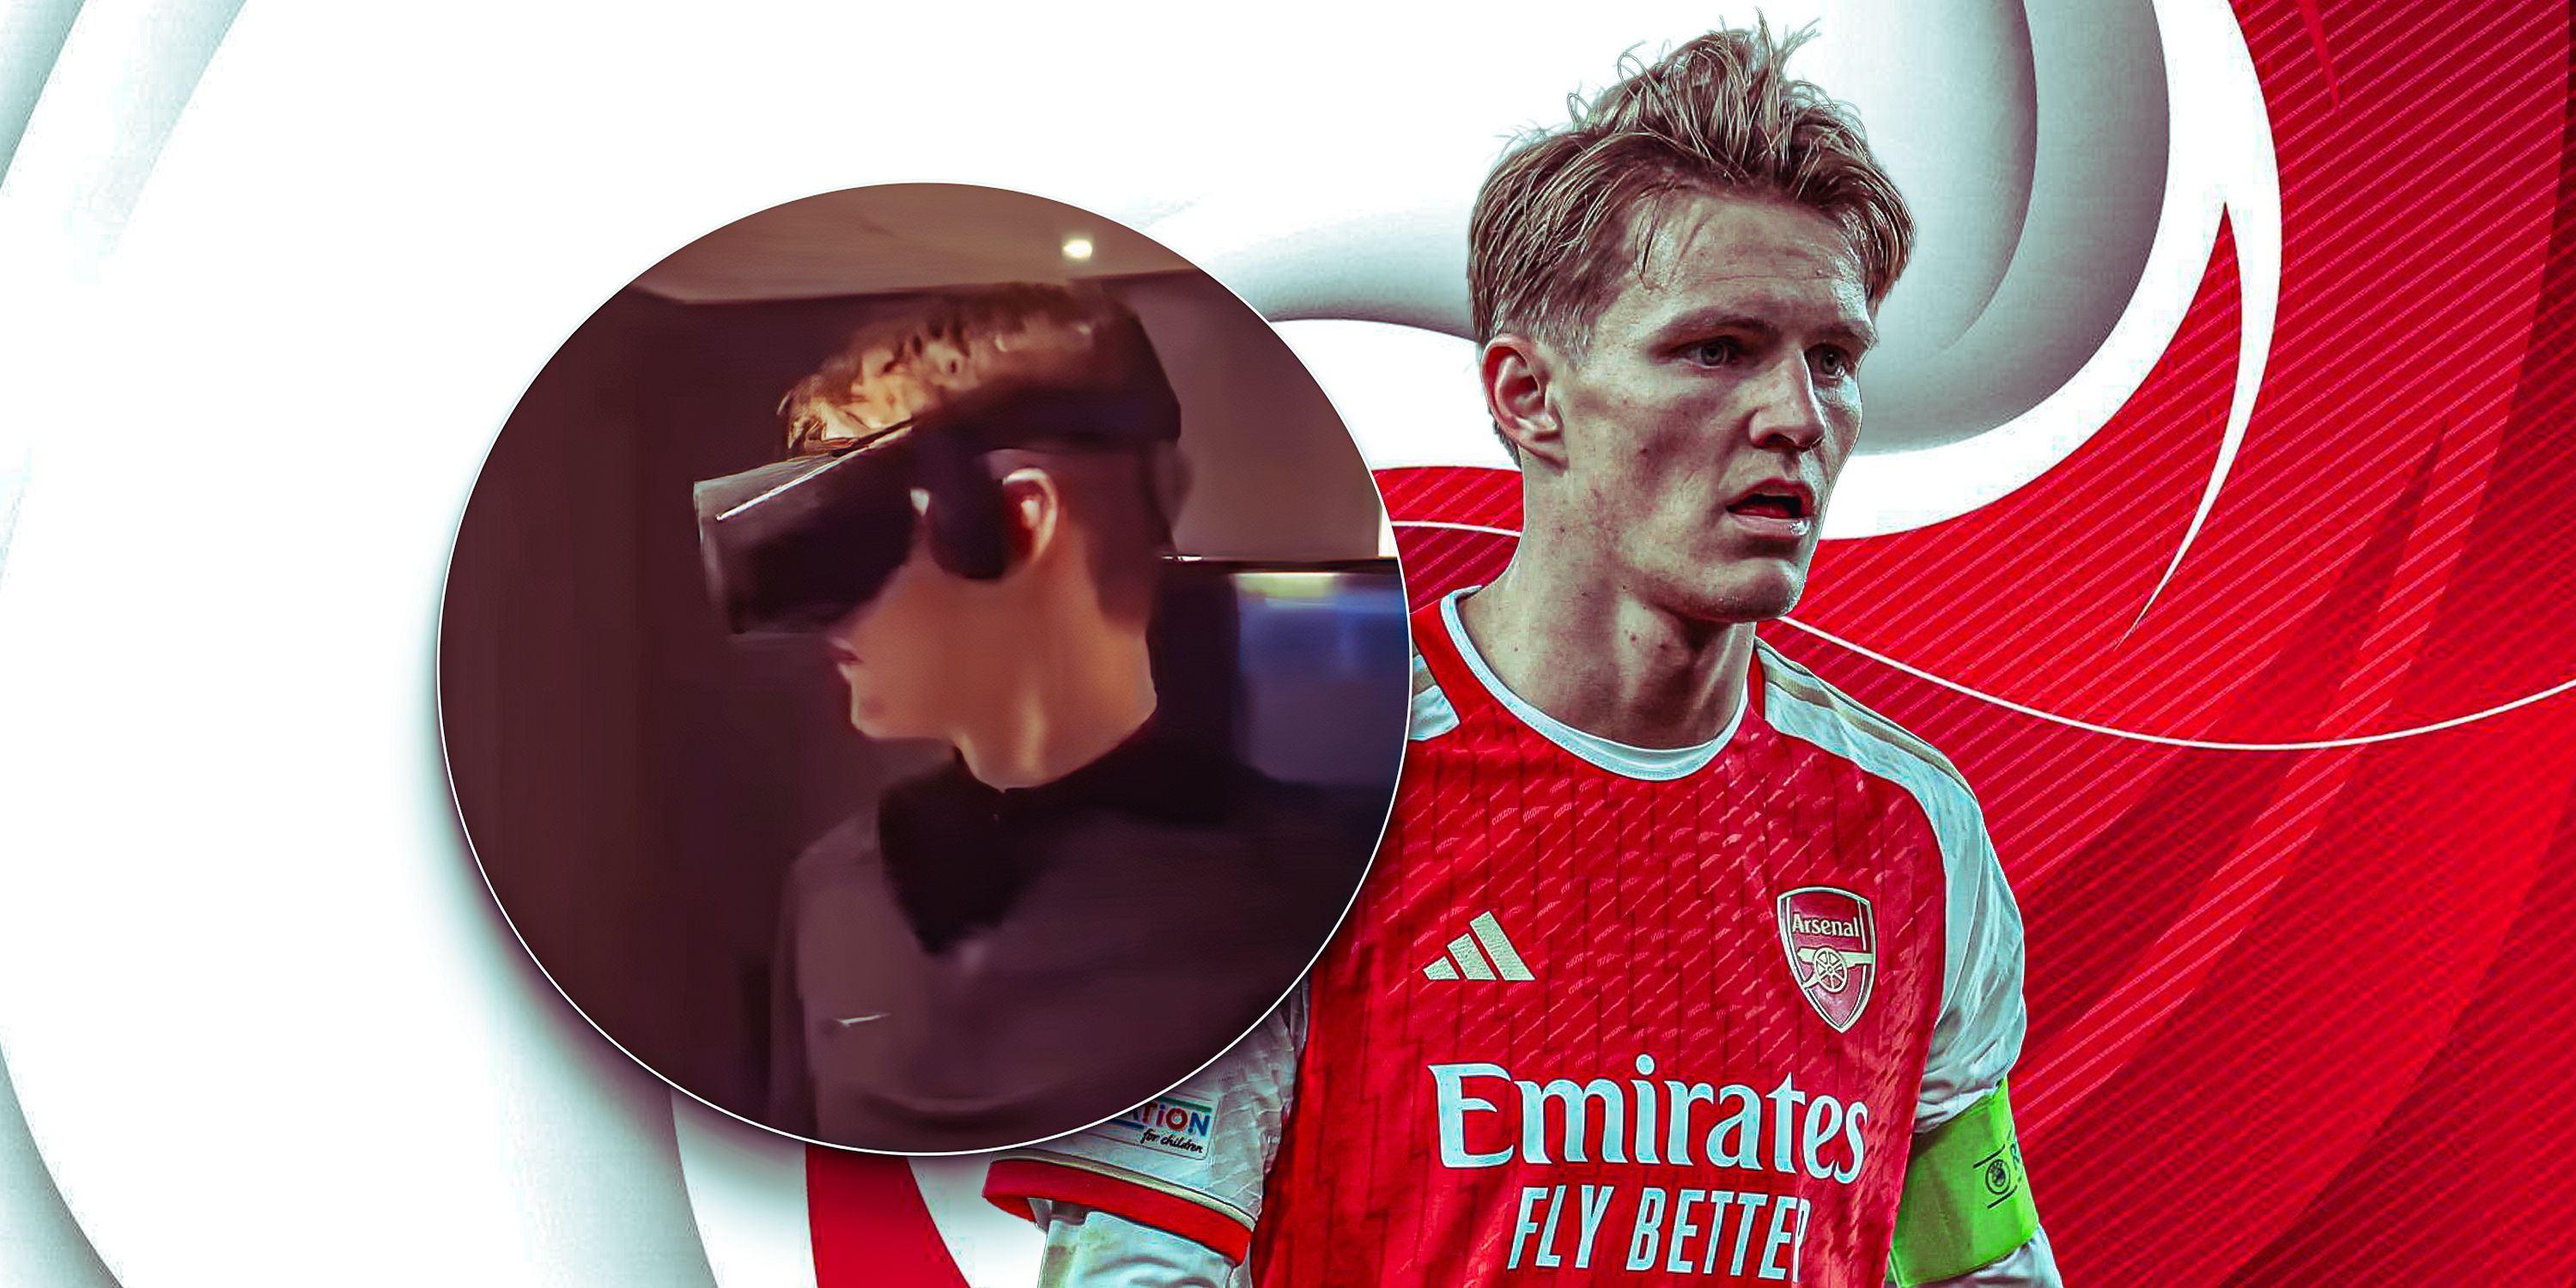 Martin Odegaard in Arsenal kit and then also him with VR set